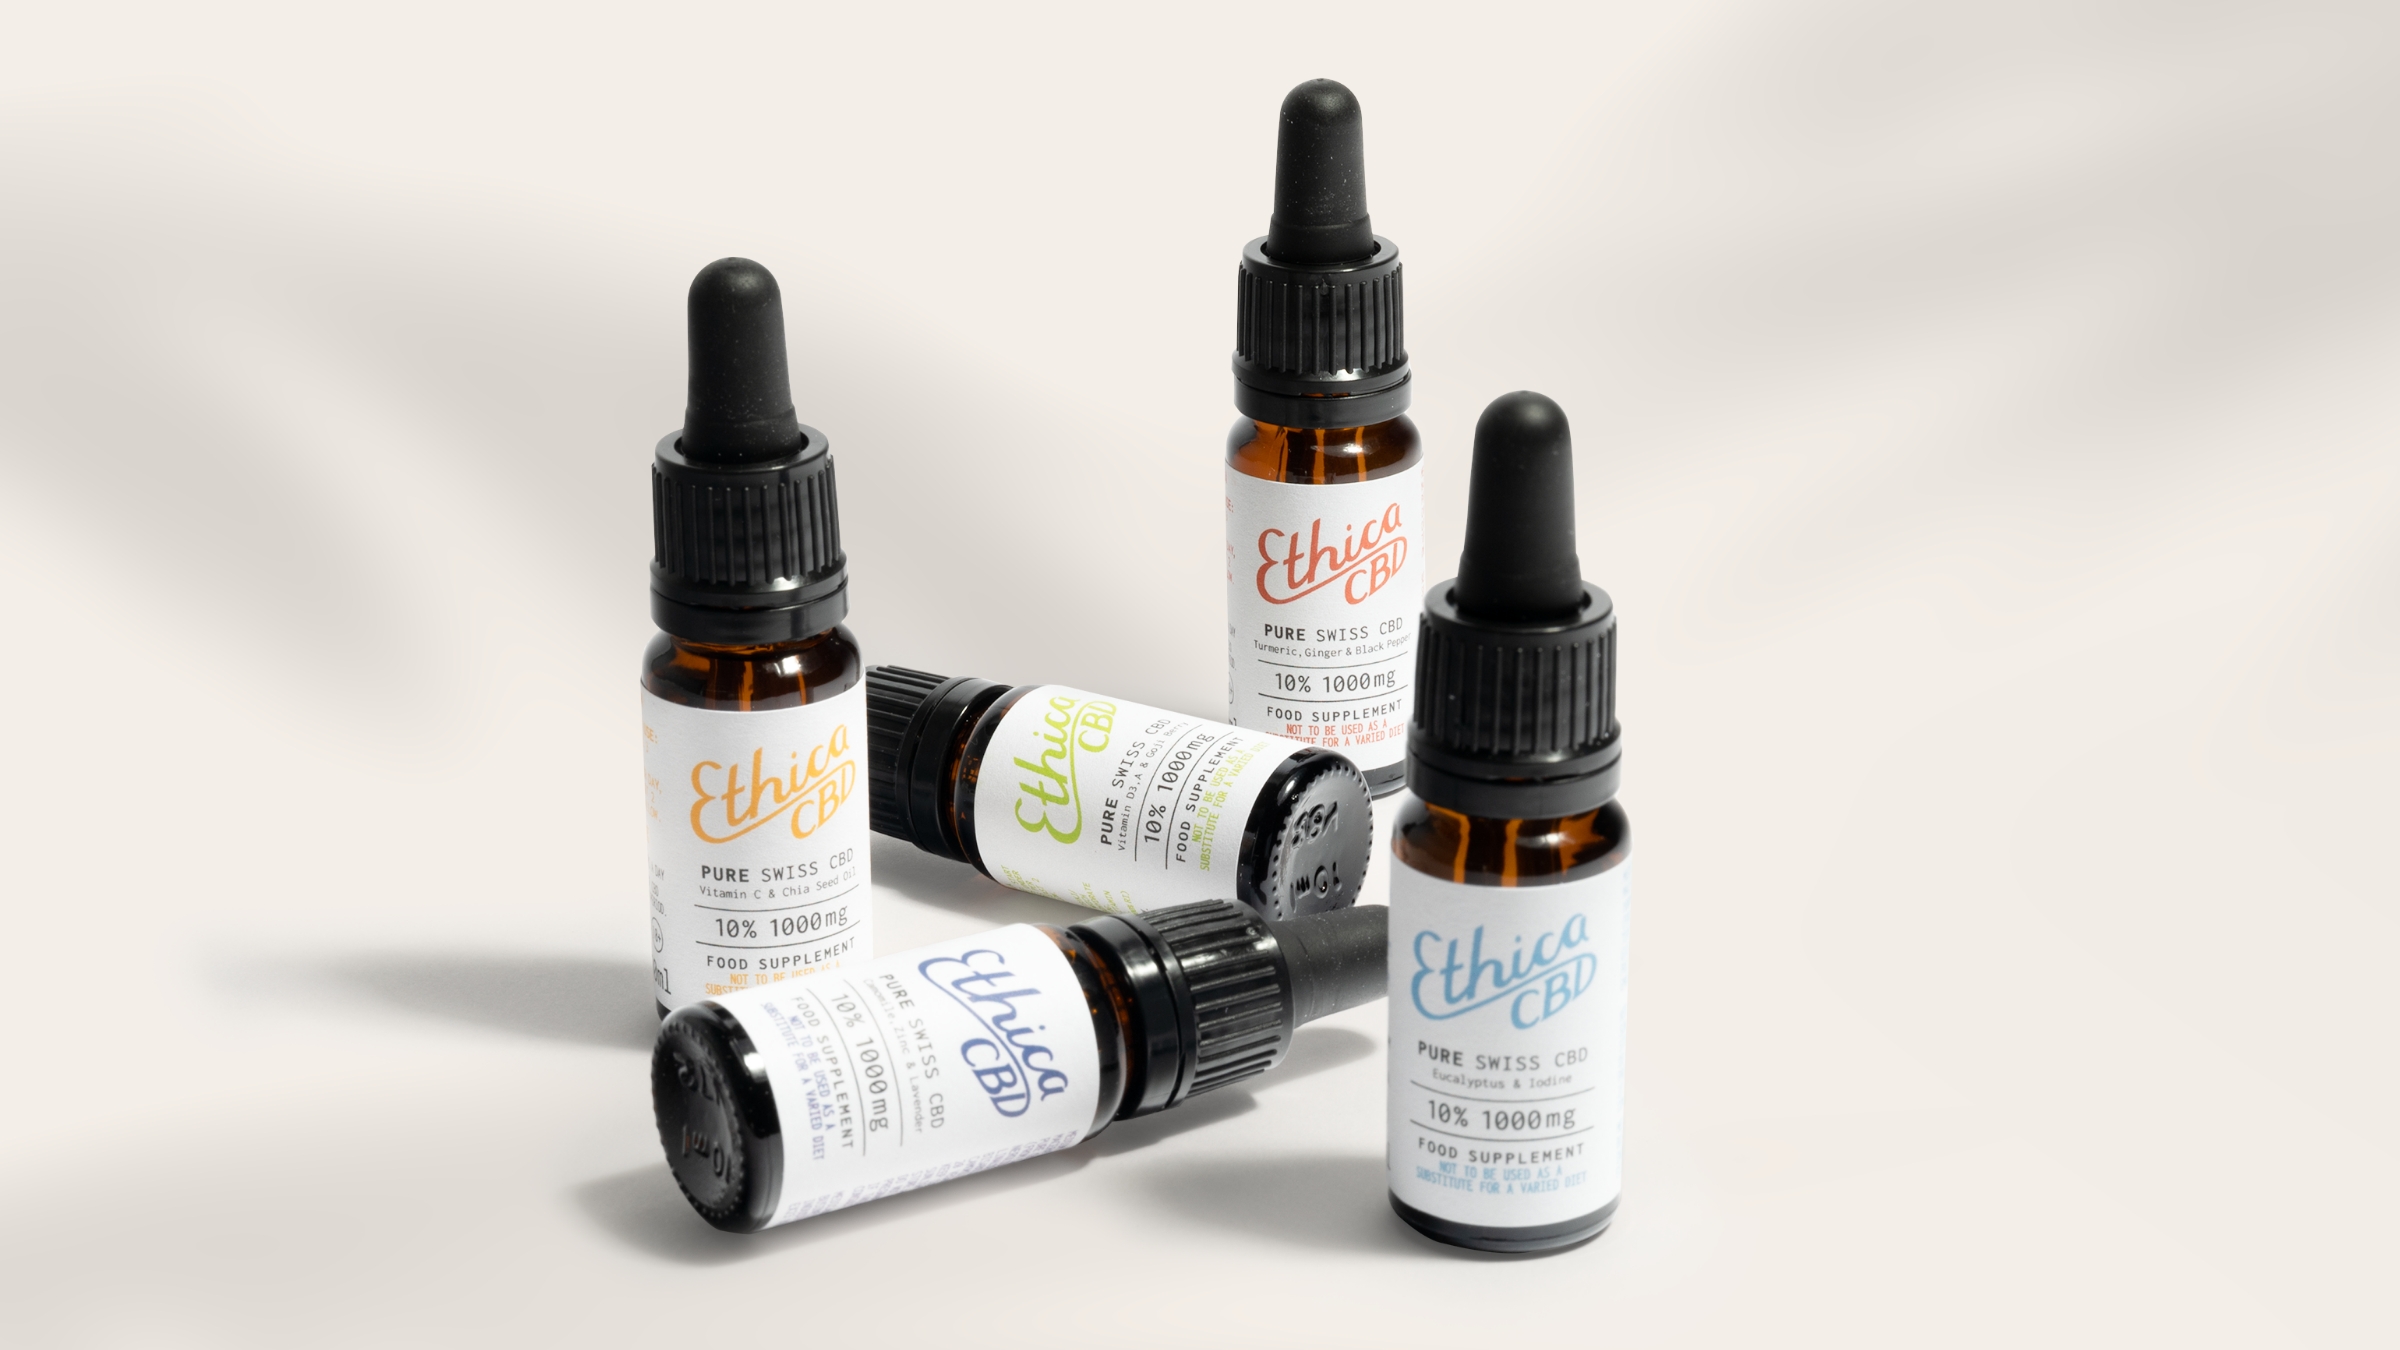 EthicaCBD – Creating Plant-Based Care With Ethical CBD